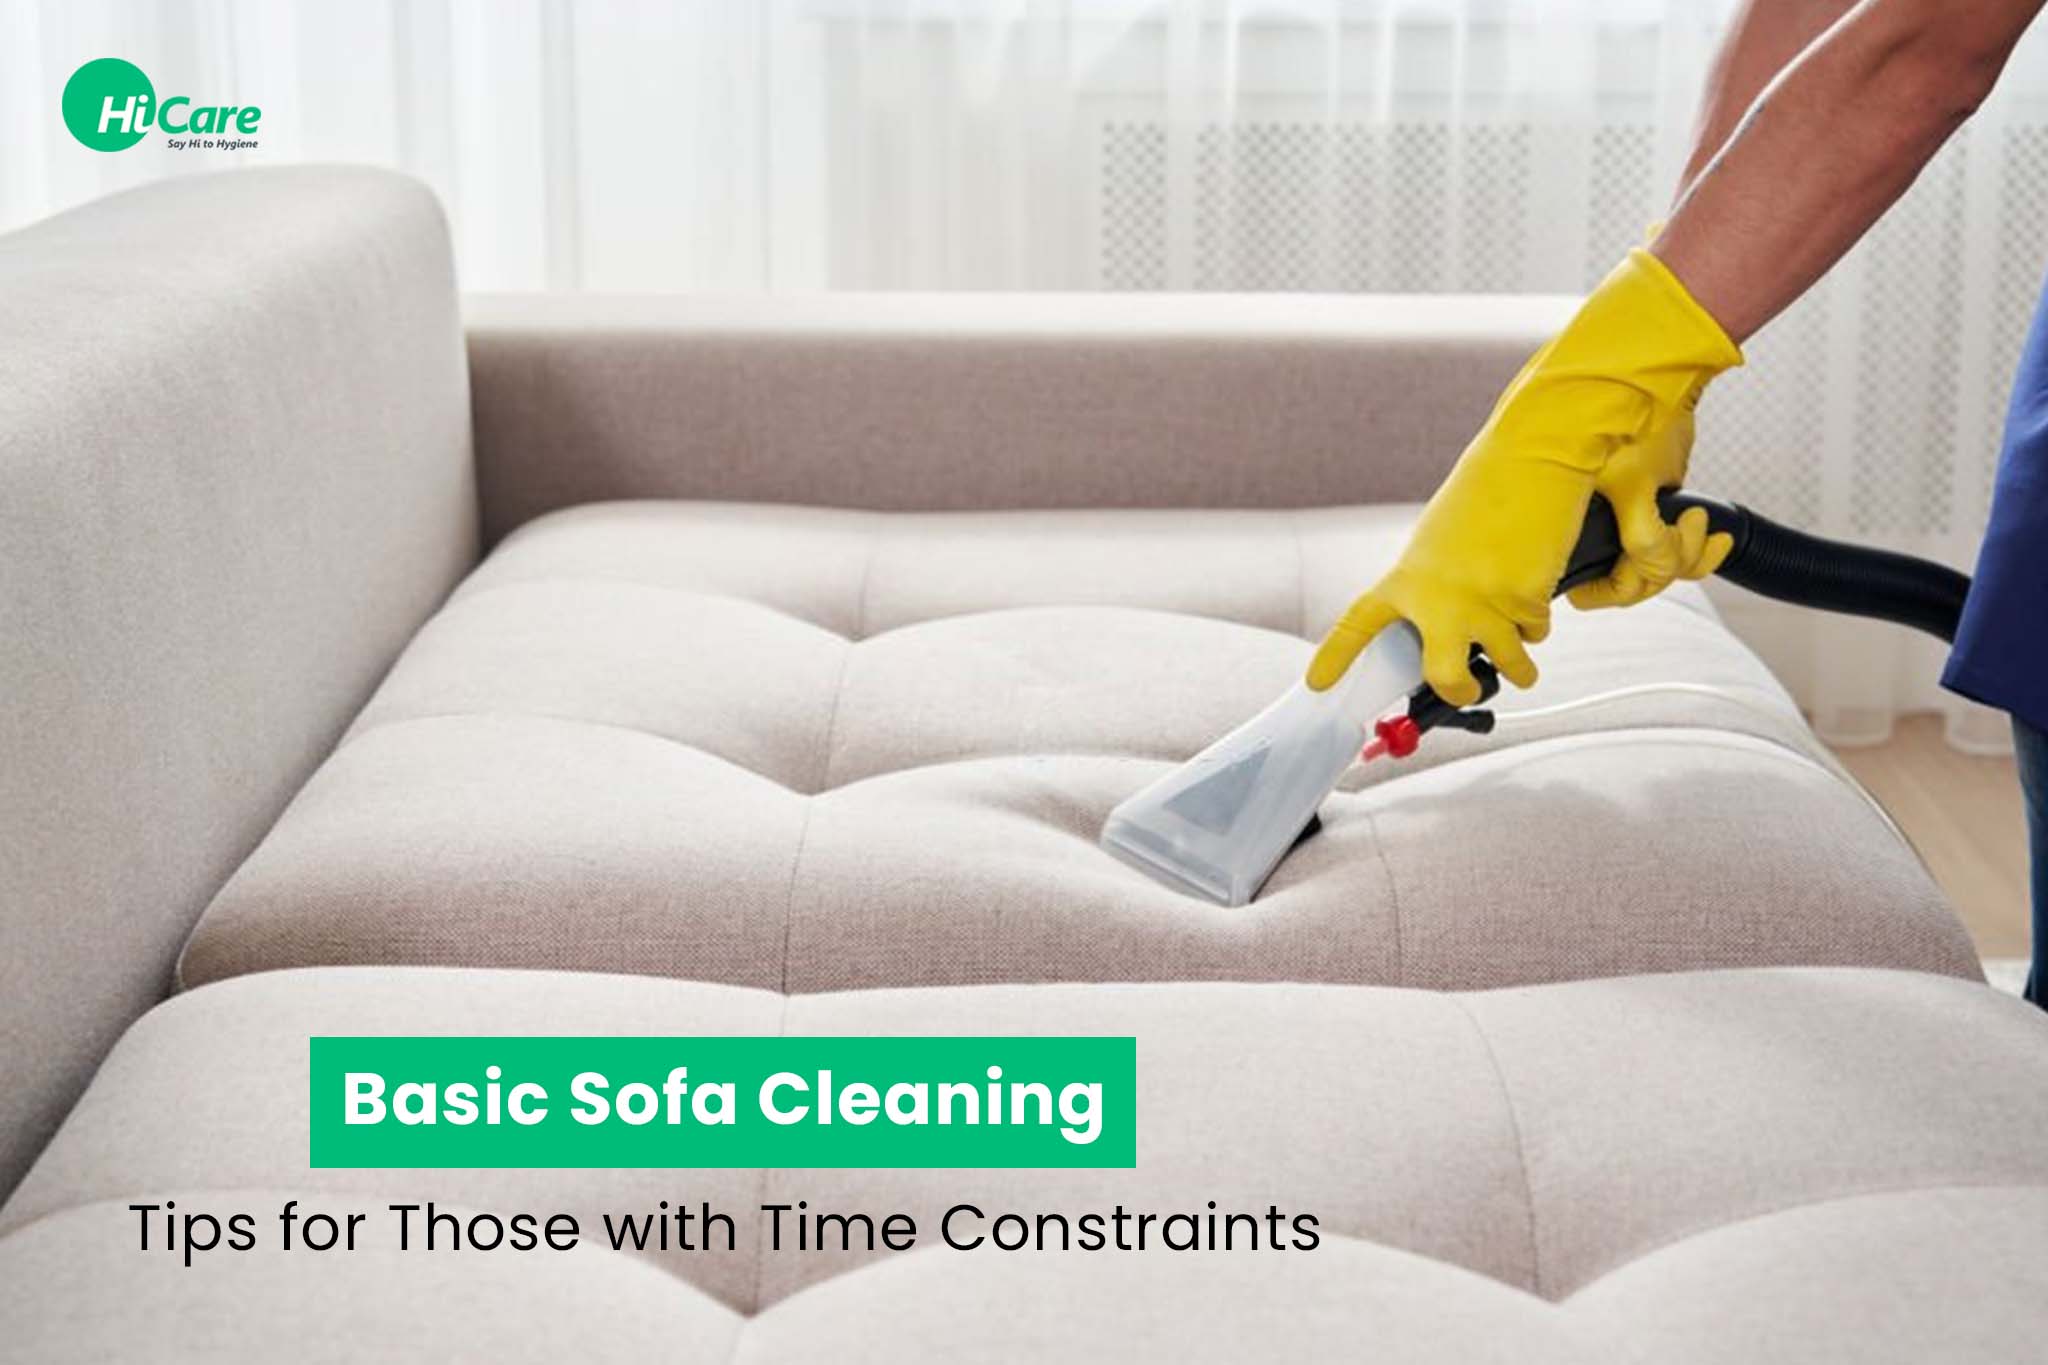 How To Clean A Suede Sofa - Tips And A Professional Service